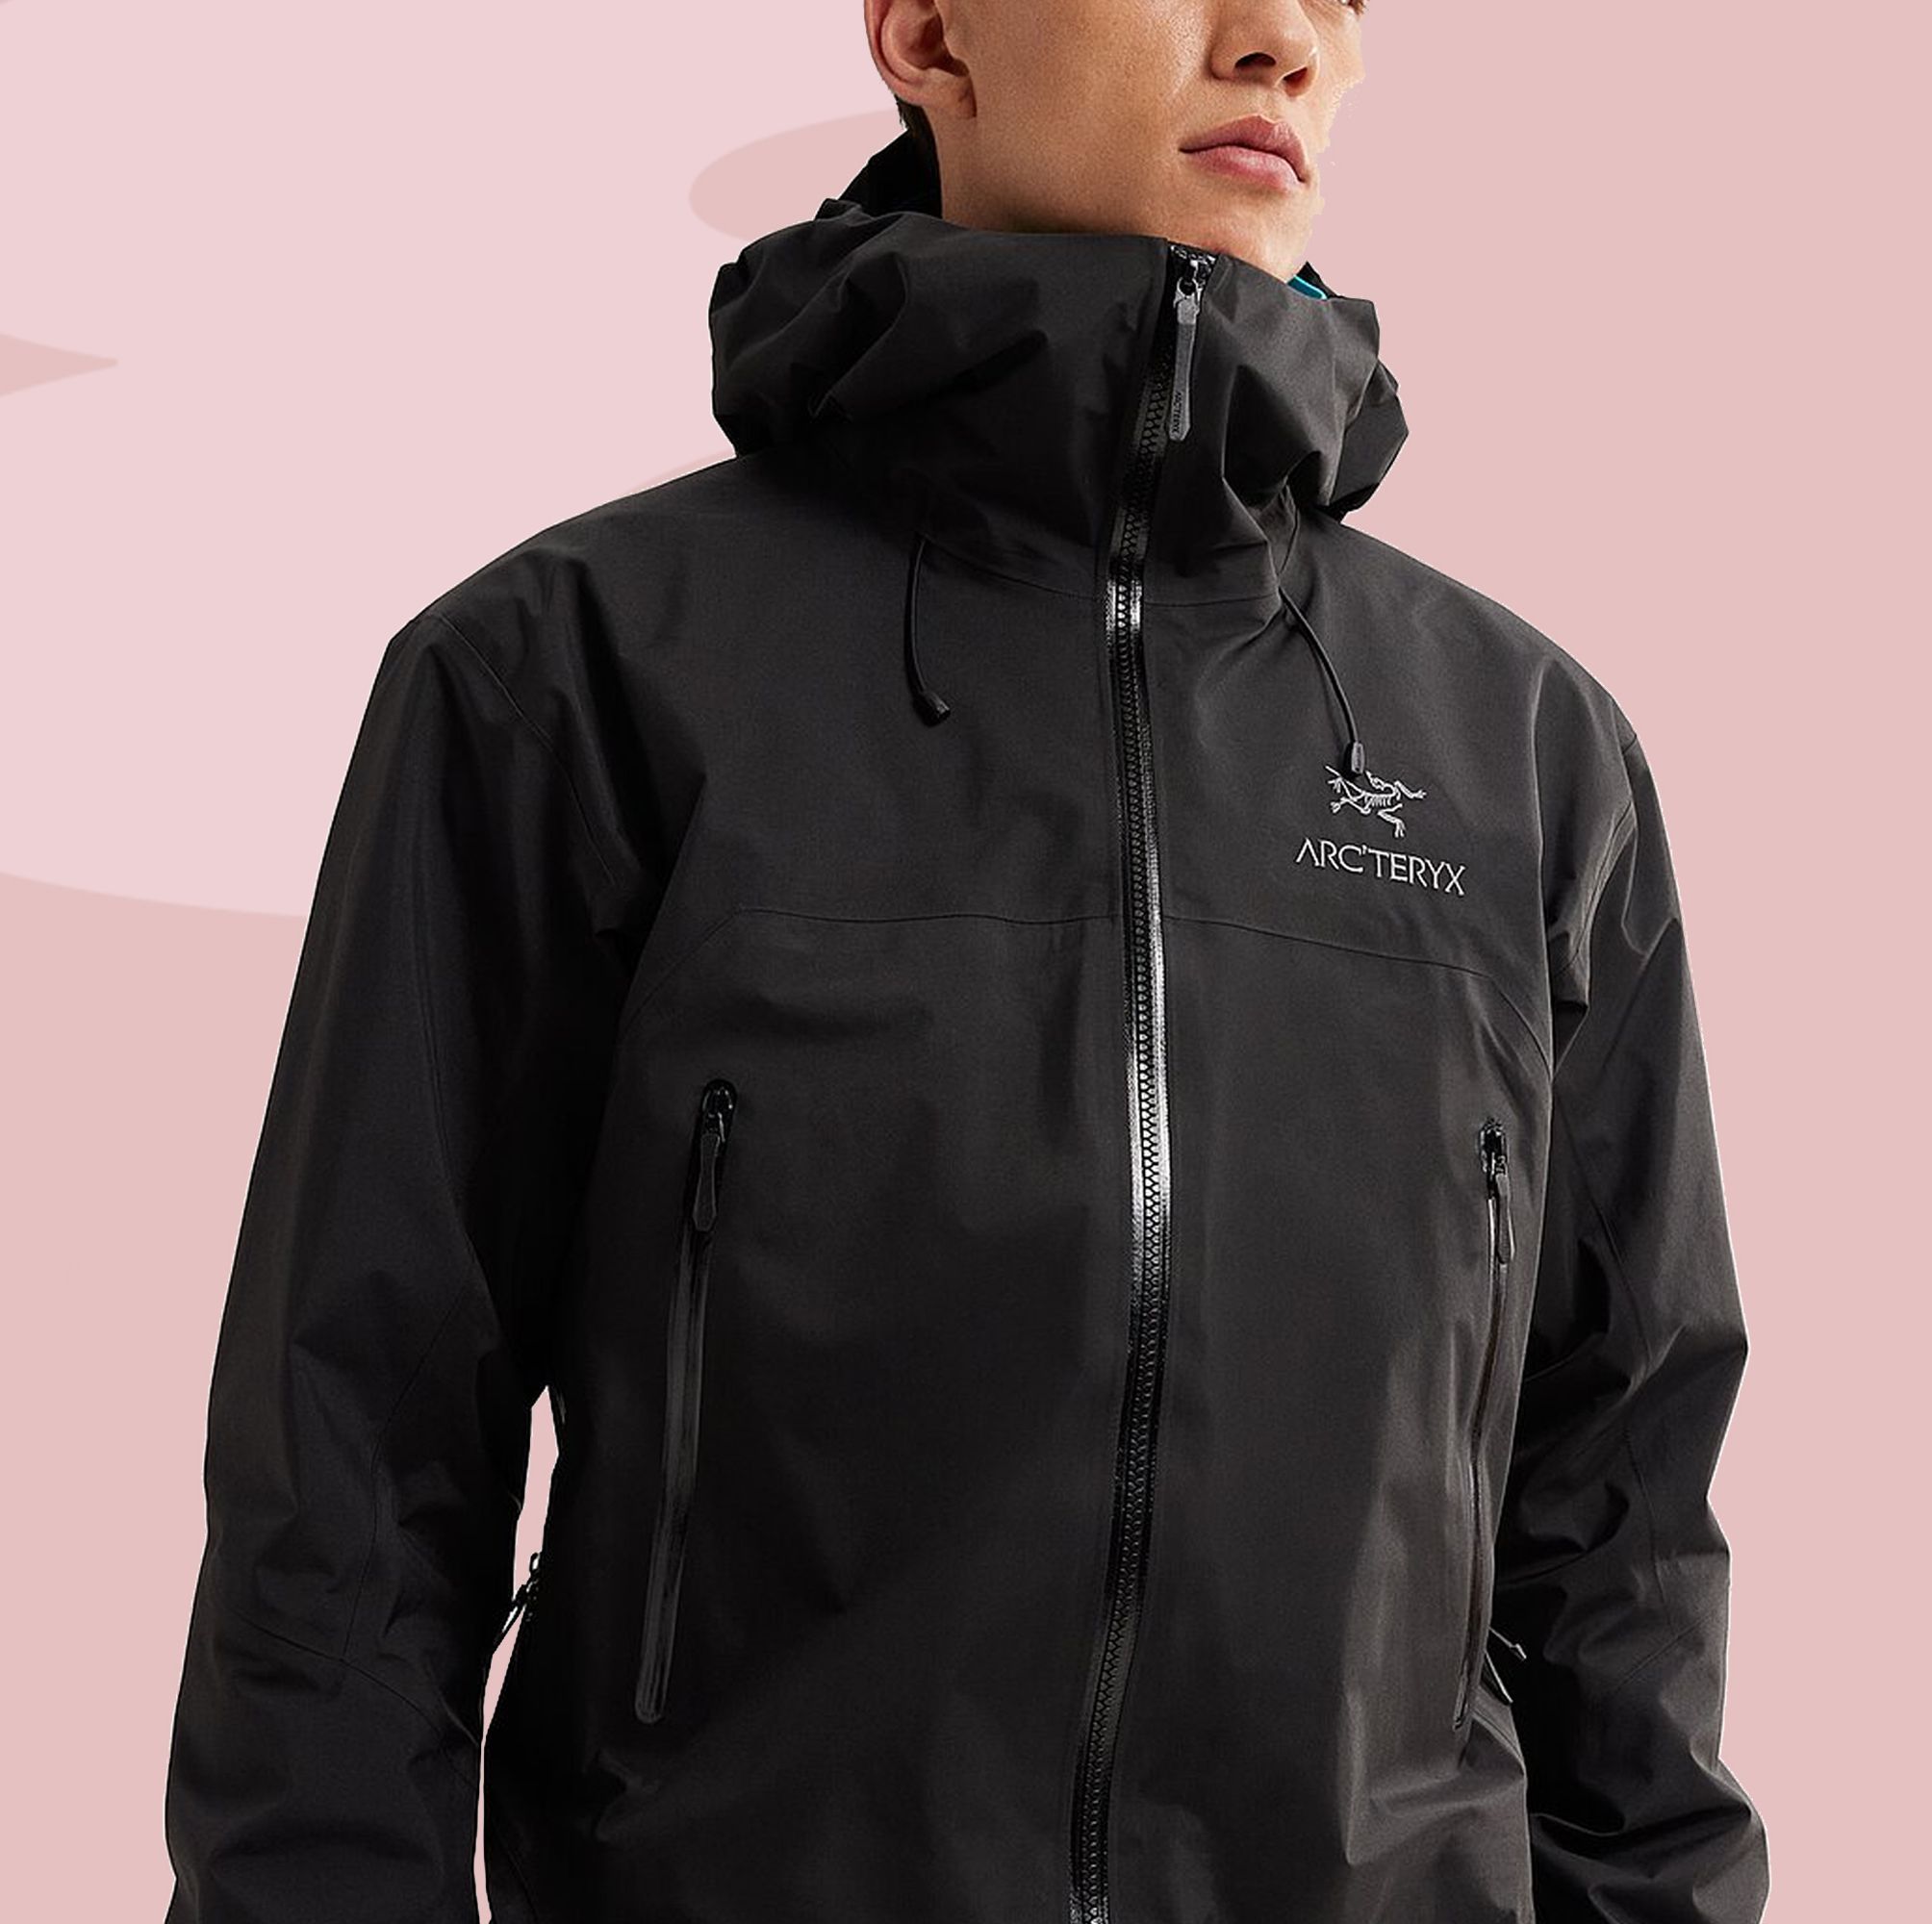 What Arc'teryx Jacket Should I Buy? A Guide to The Dead Bird.